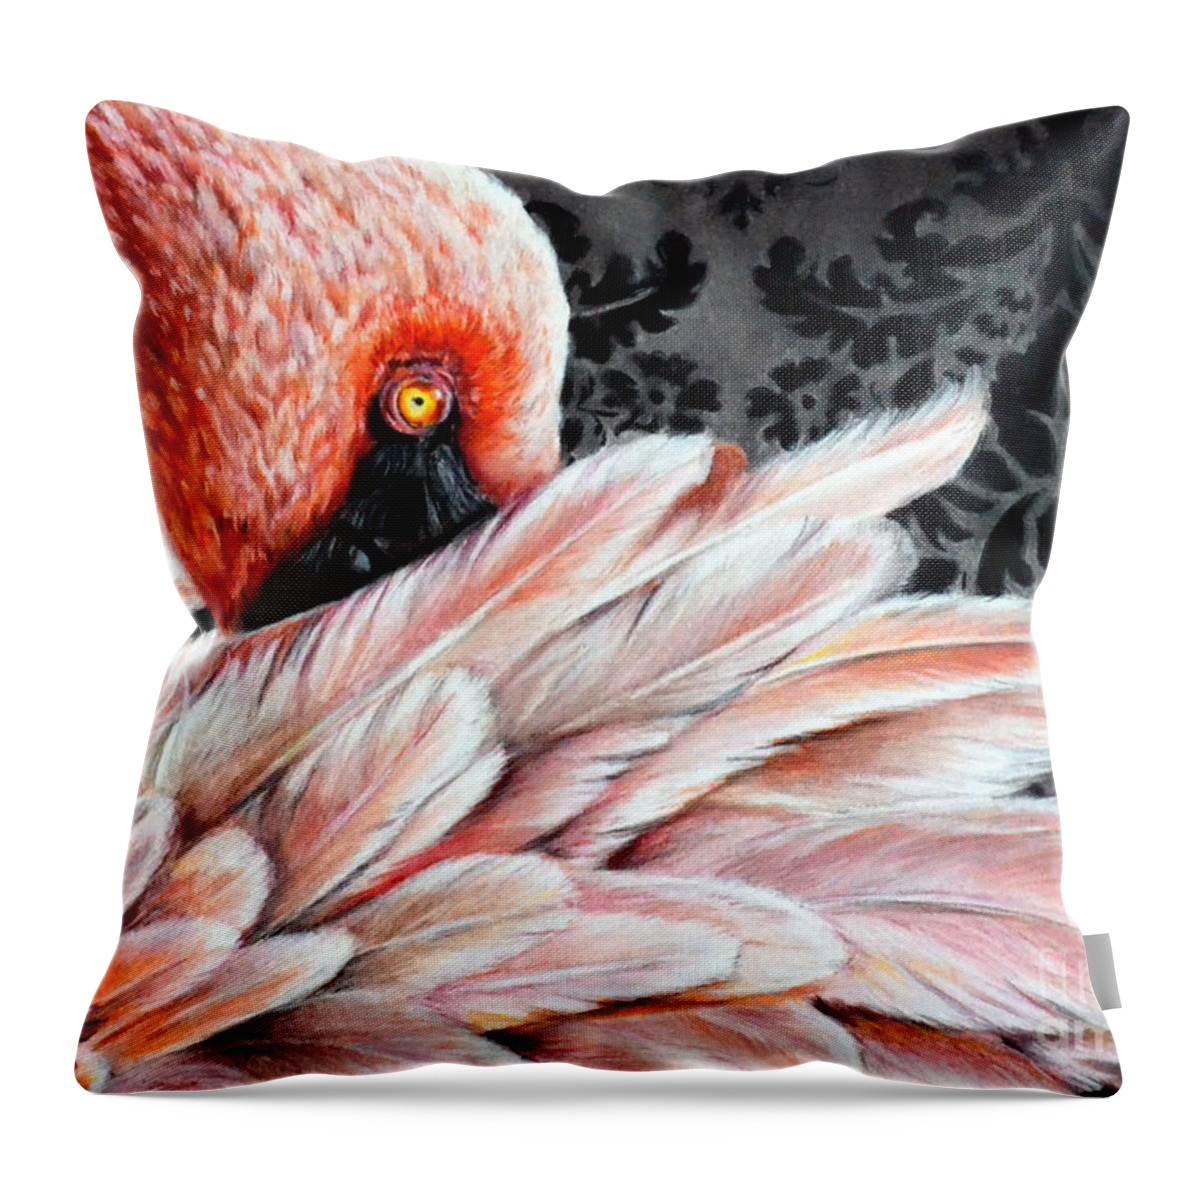 Flamingo Throw Pillow featuring the painting Flamingo by Lachri